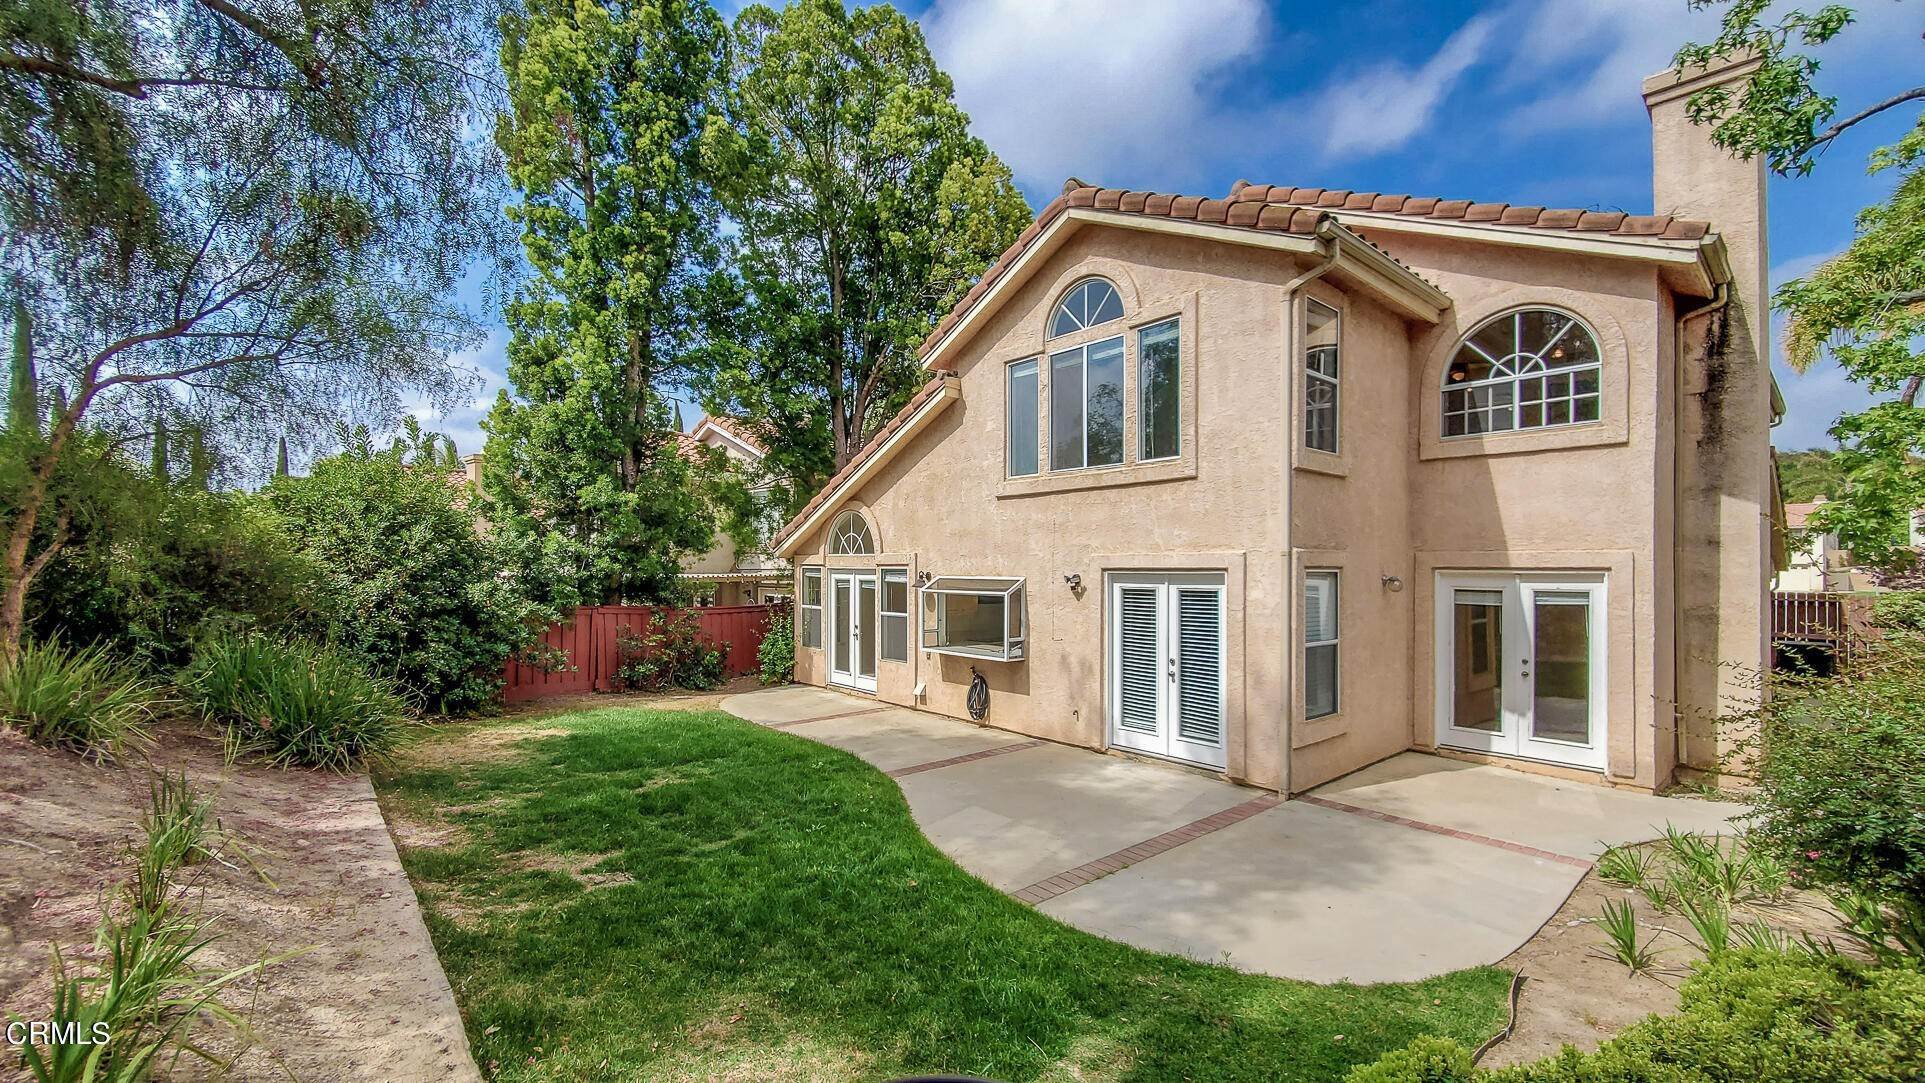 35. Single Family Homes at 566 Innwood Rd 566 Innwood Rd Simi Valley, California 93065 United States